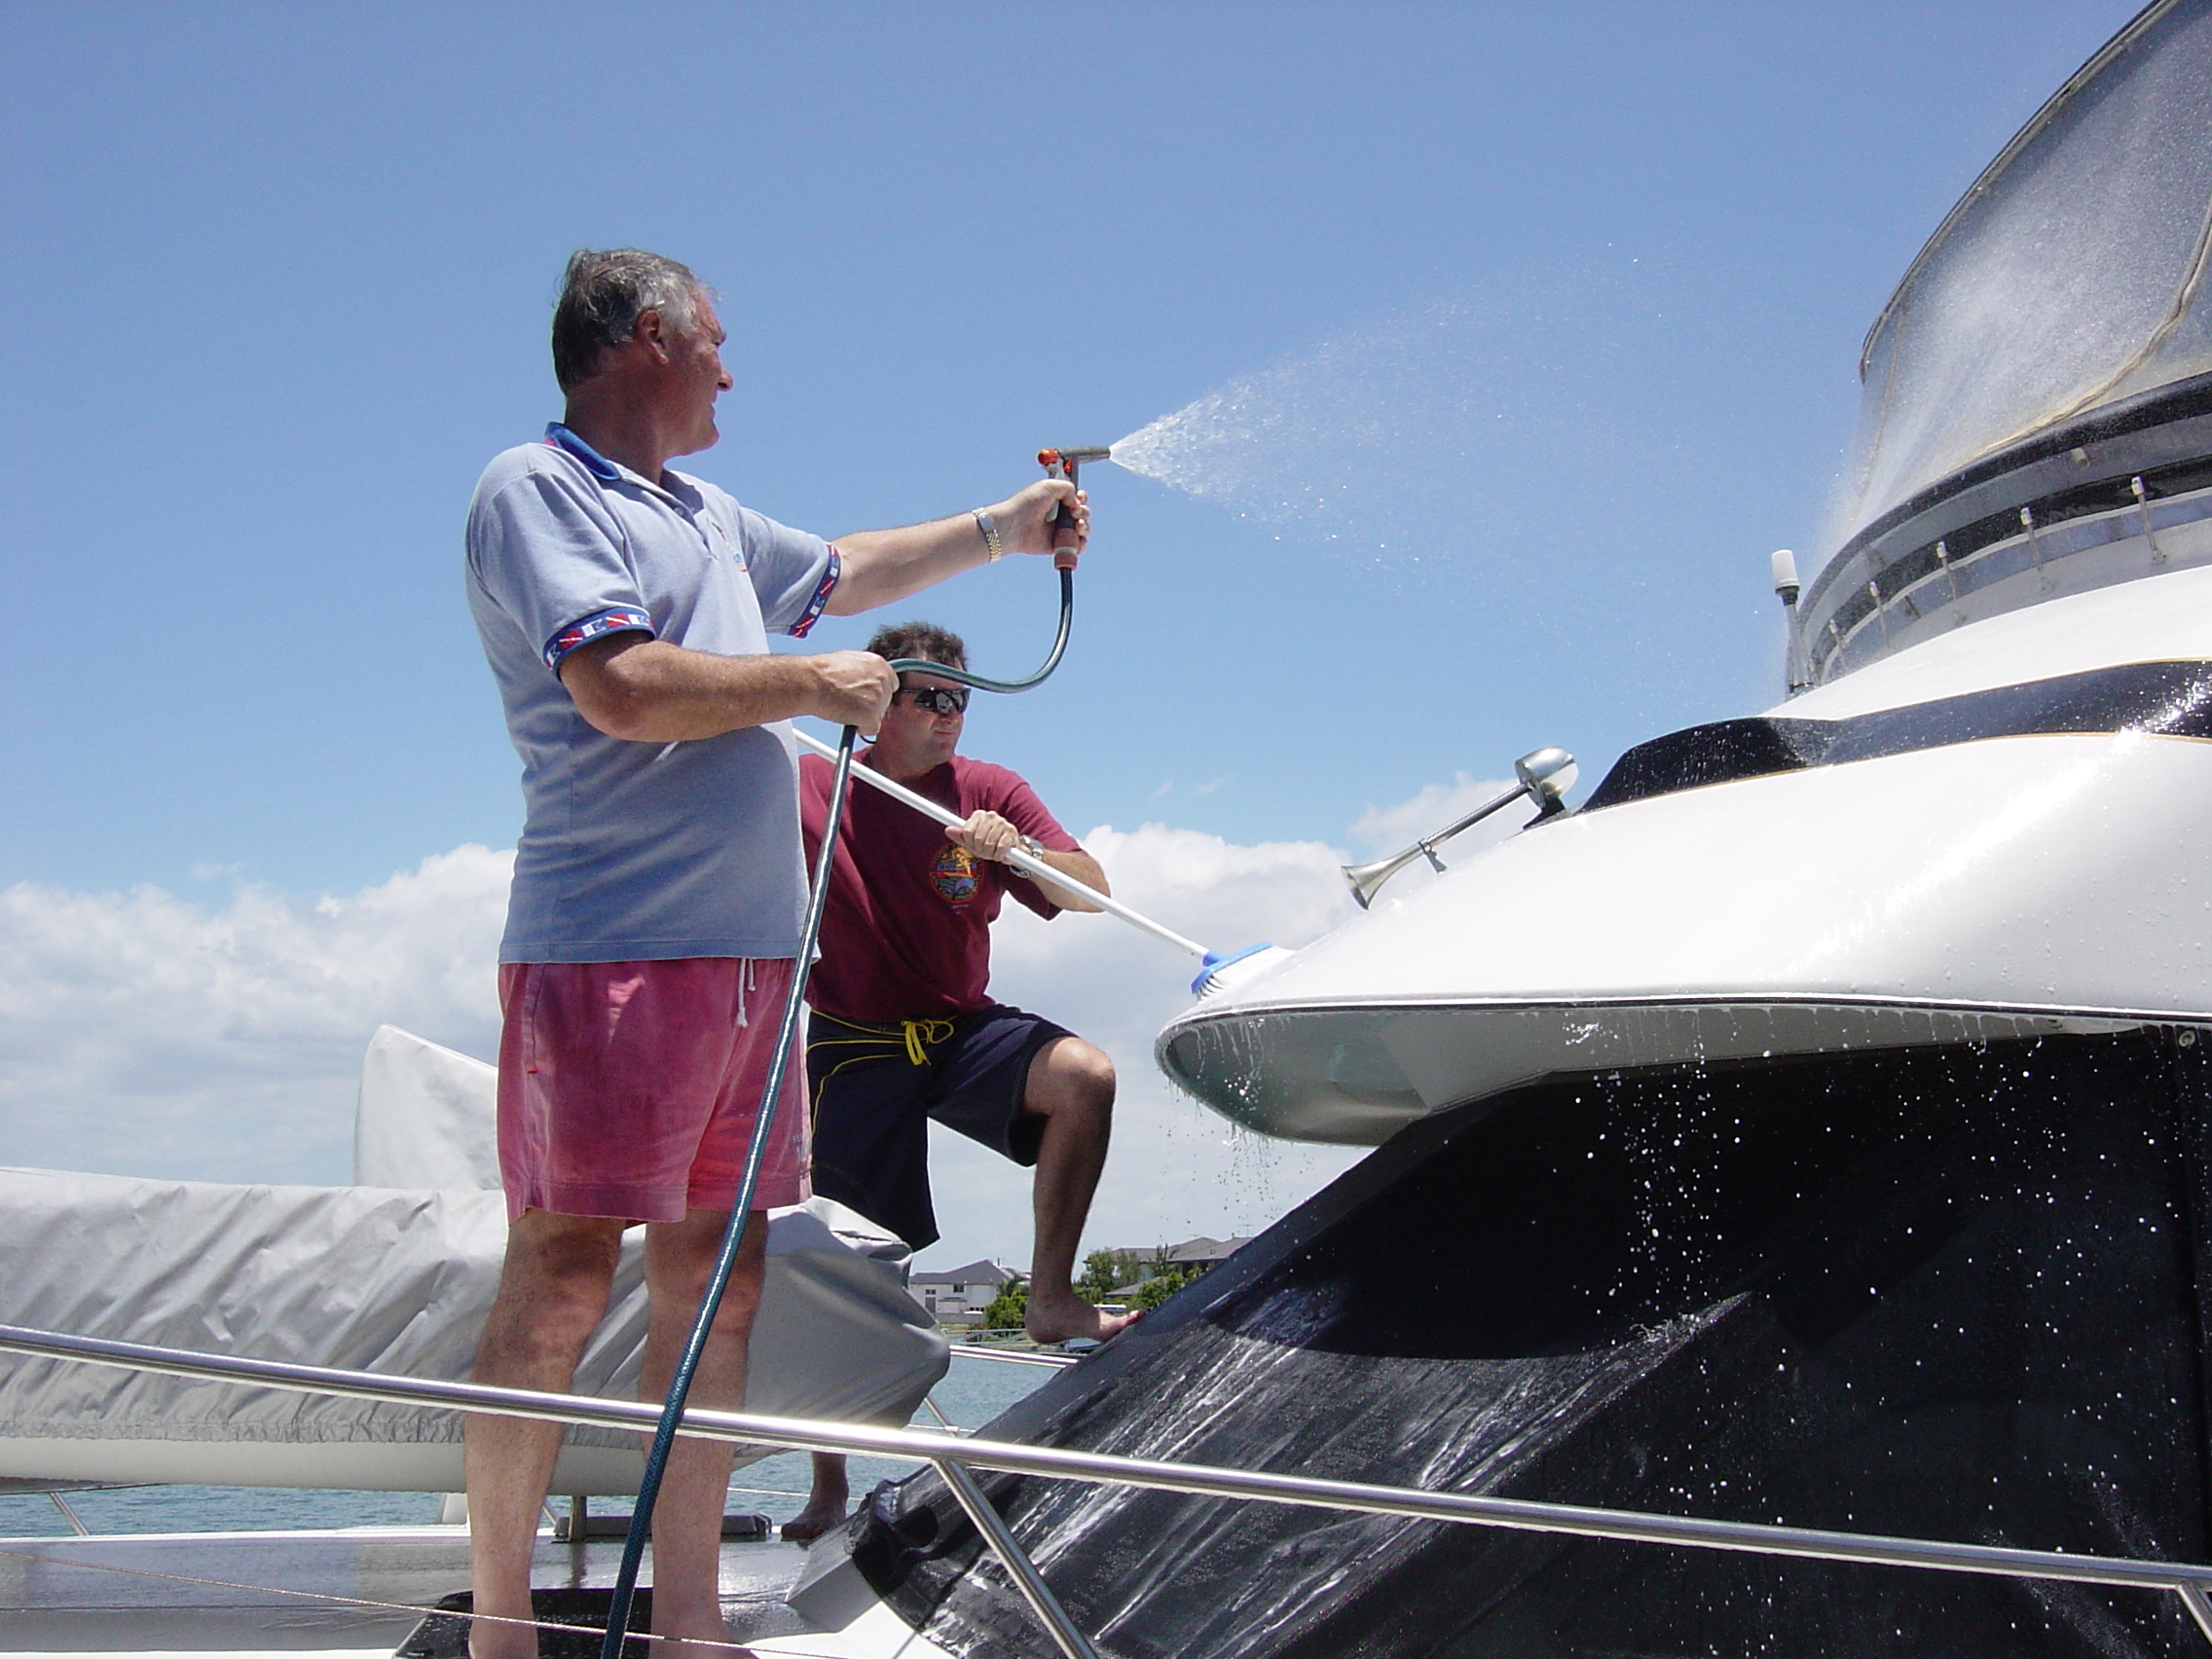 Keep your Boat Pristine with SX50 & B50